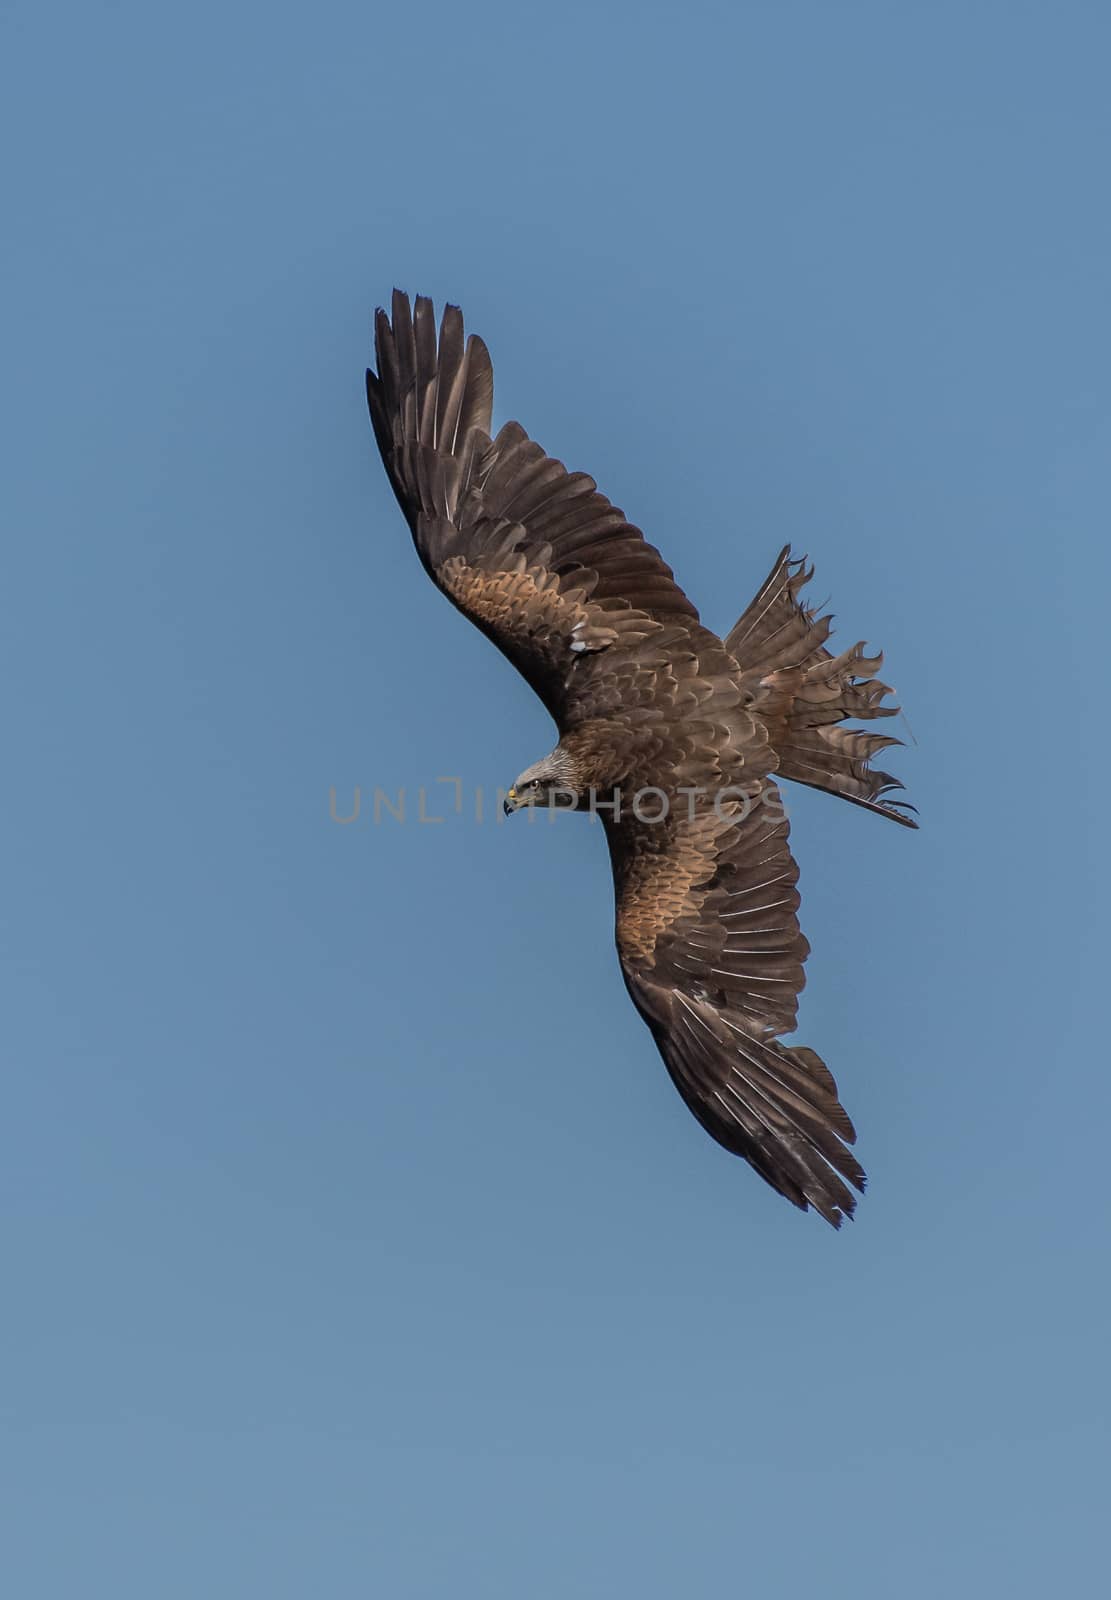 Black Kite in flight and depolyed wings by raphtong